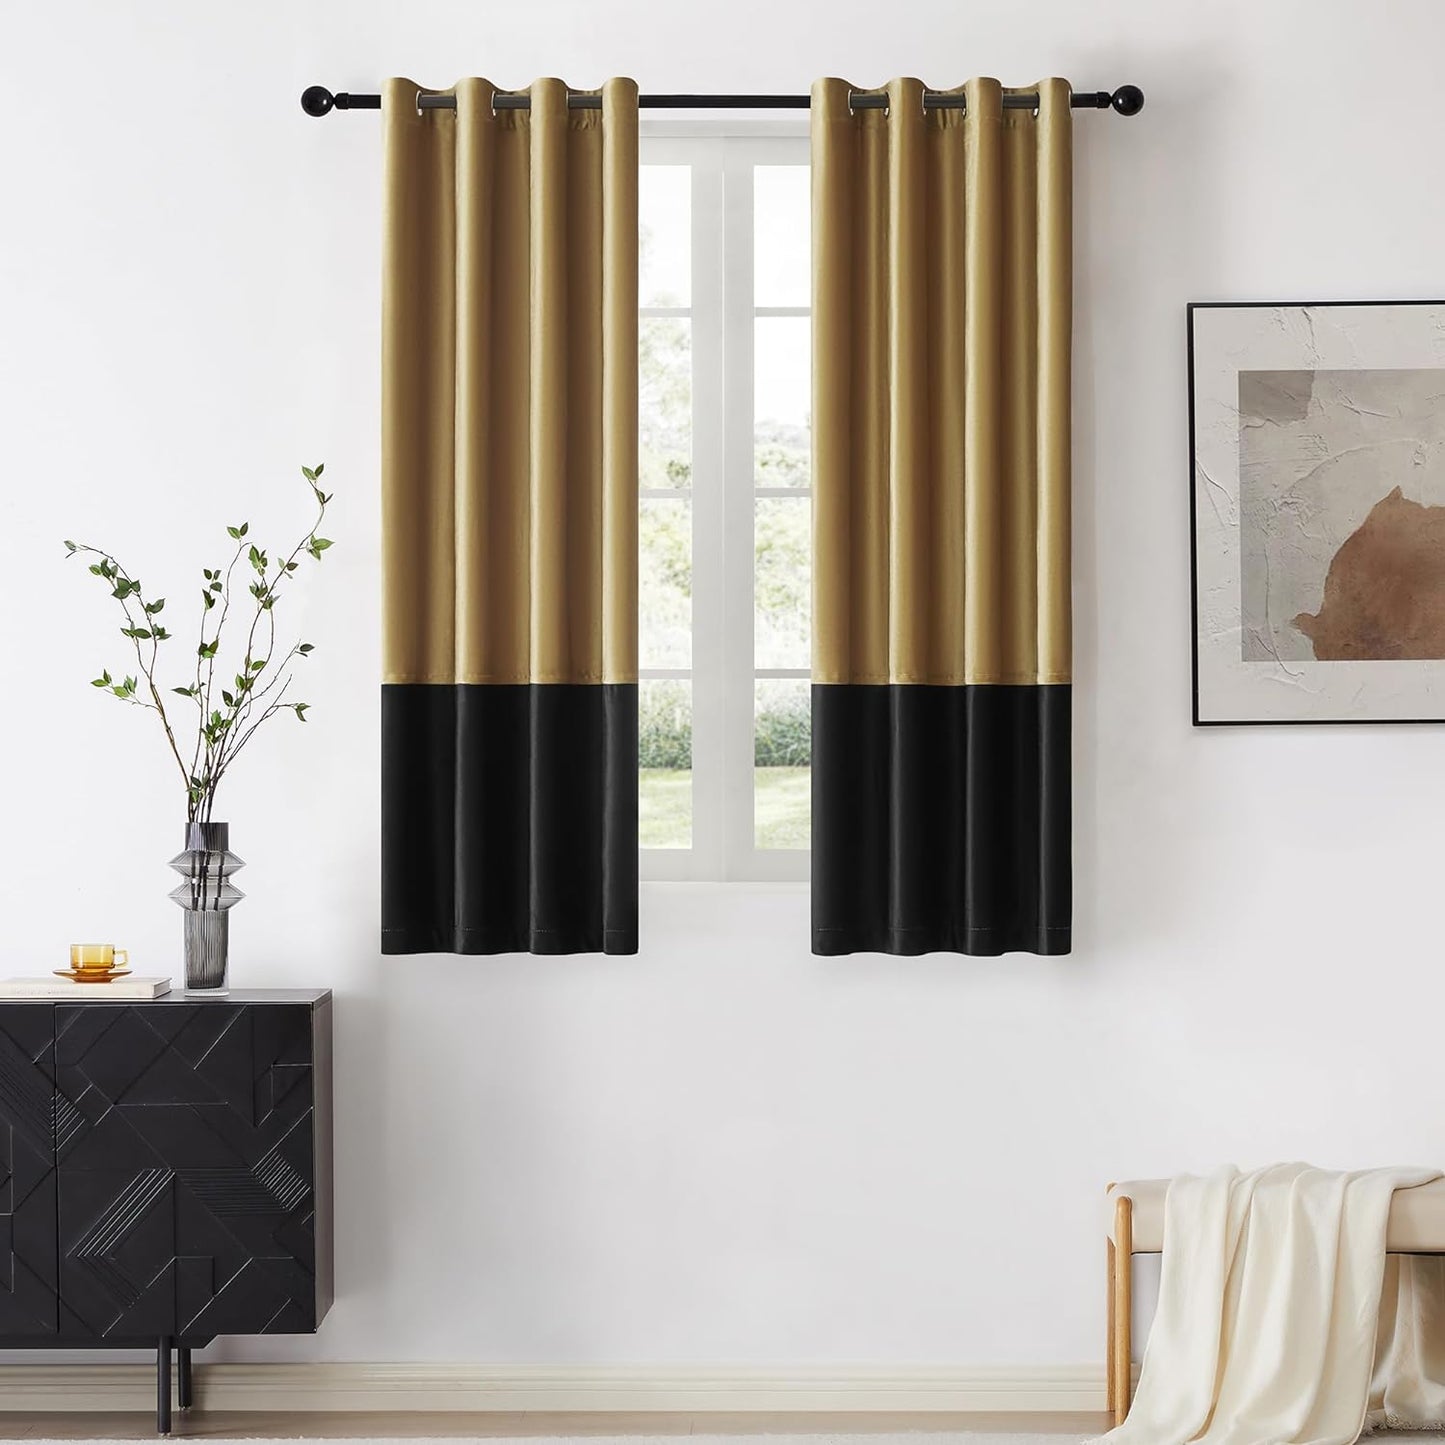 BULBUL Color Block Window Curtains Panels 84 Inches Long Cream Ivory Gold Velvet Farmhouse Drapes for Bedroom Living Room Darkening Treatment with Grommet Set of 2  BULBUL Gold  Black 52"W X 63"L 